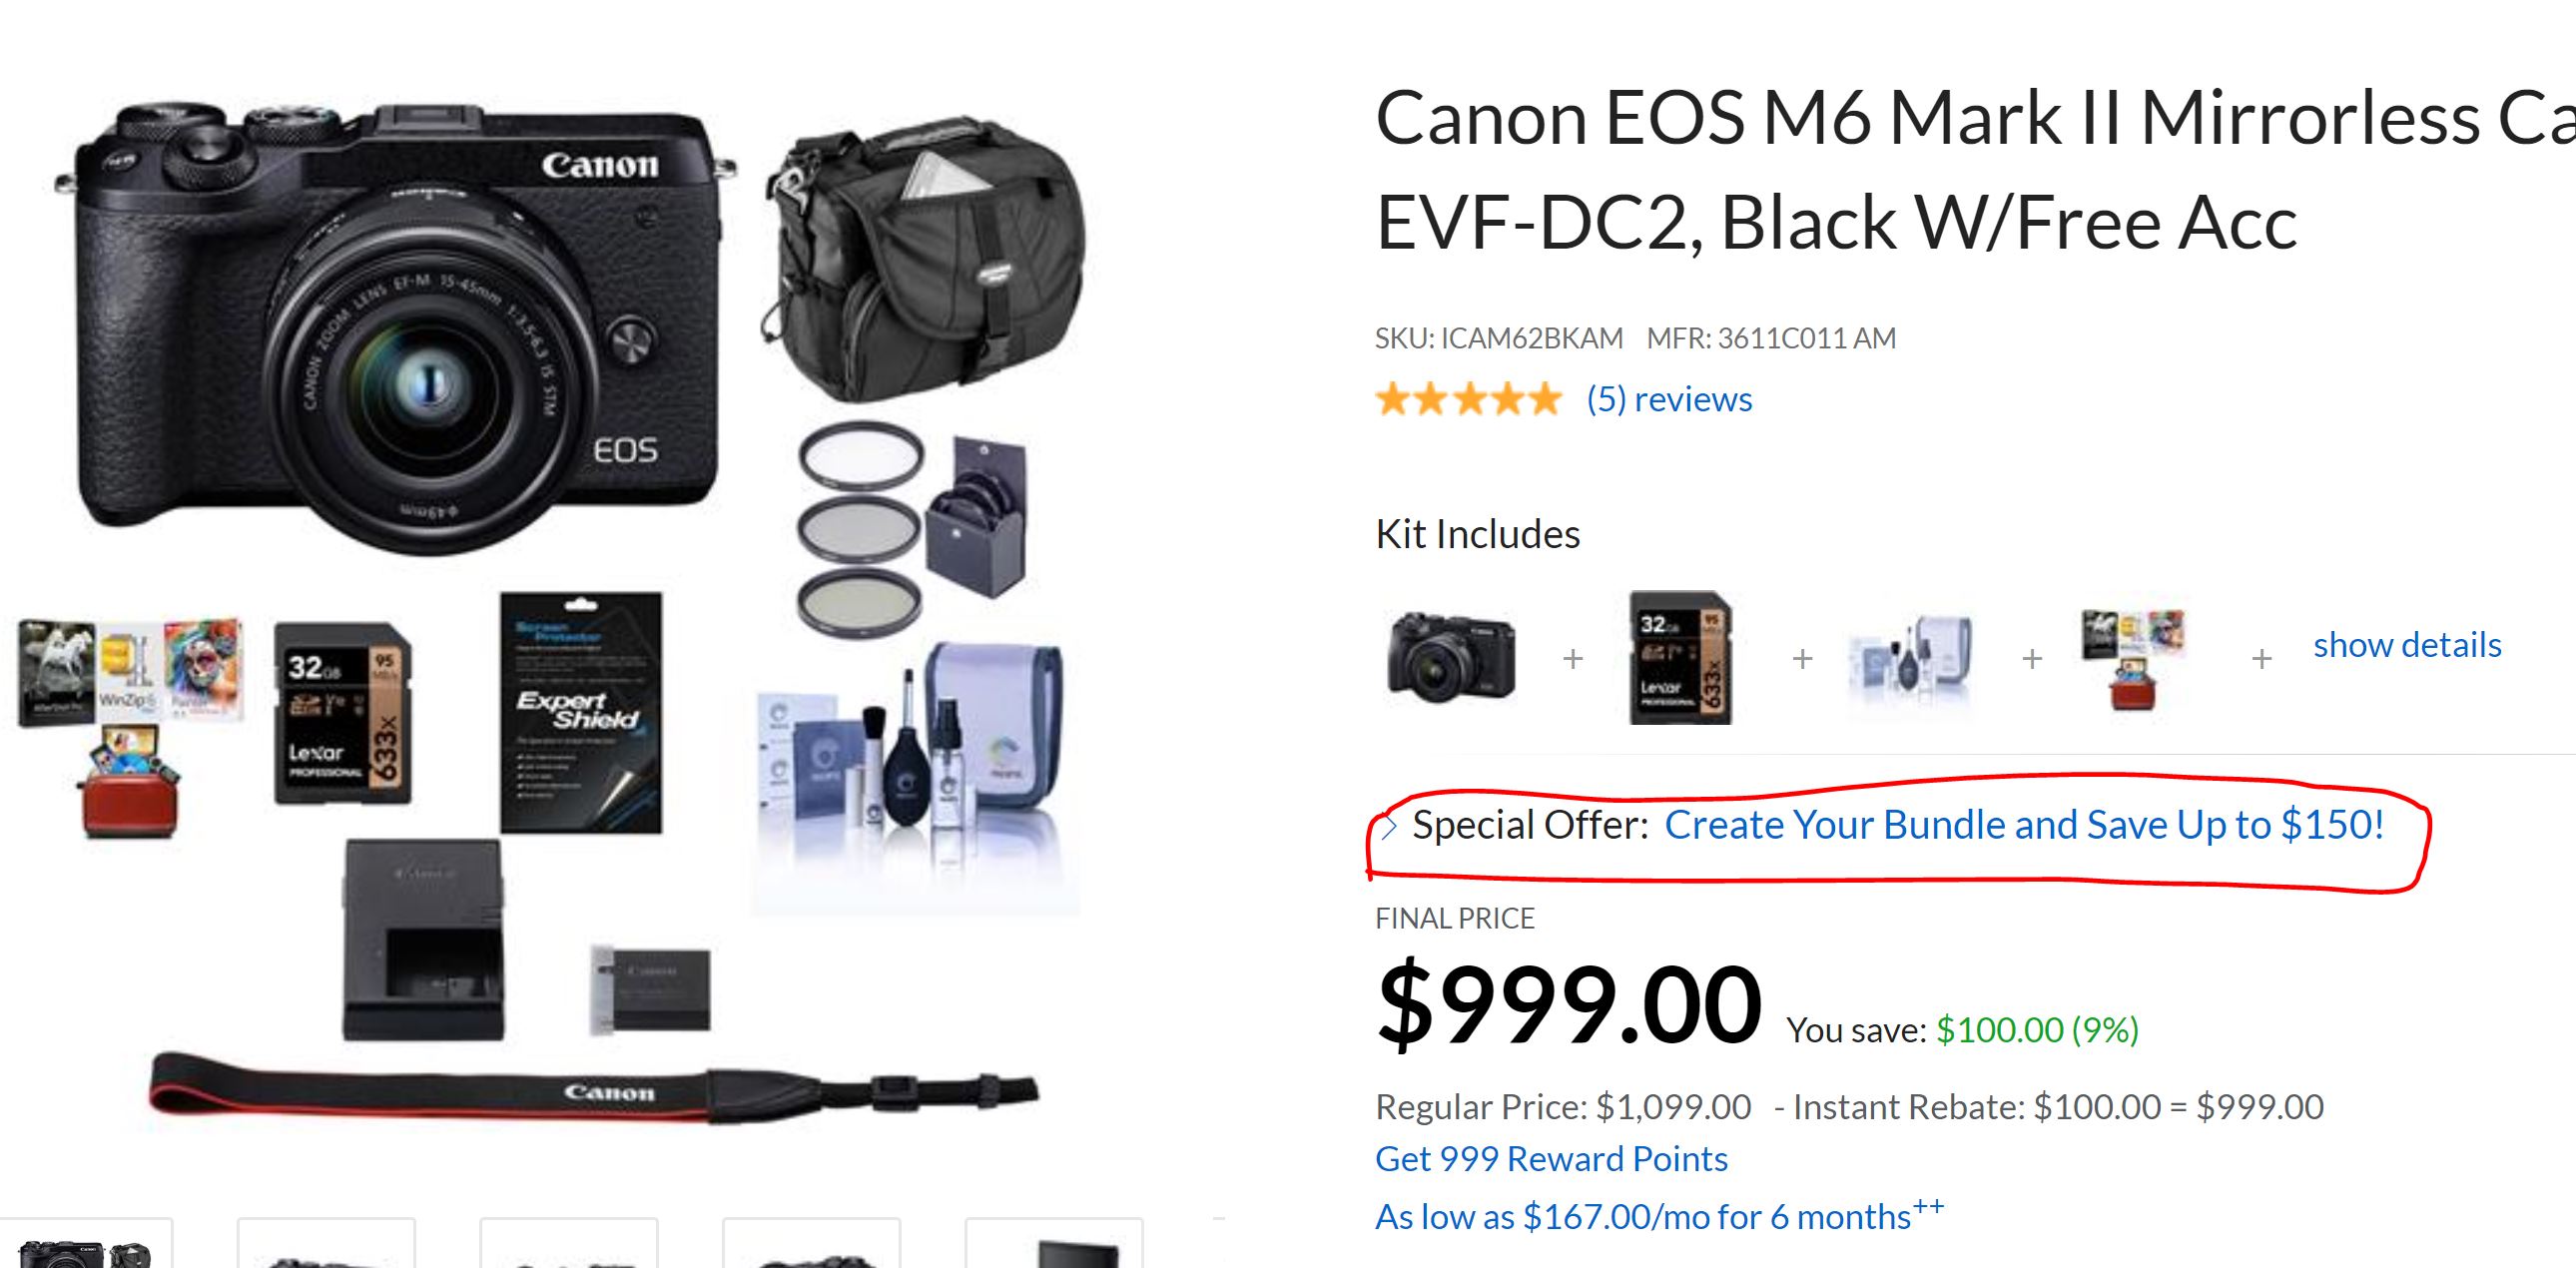 Free EF/EF-M Adapter when Buy Canon EOS M6 Mark II at B&H & Adorama !